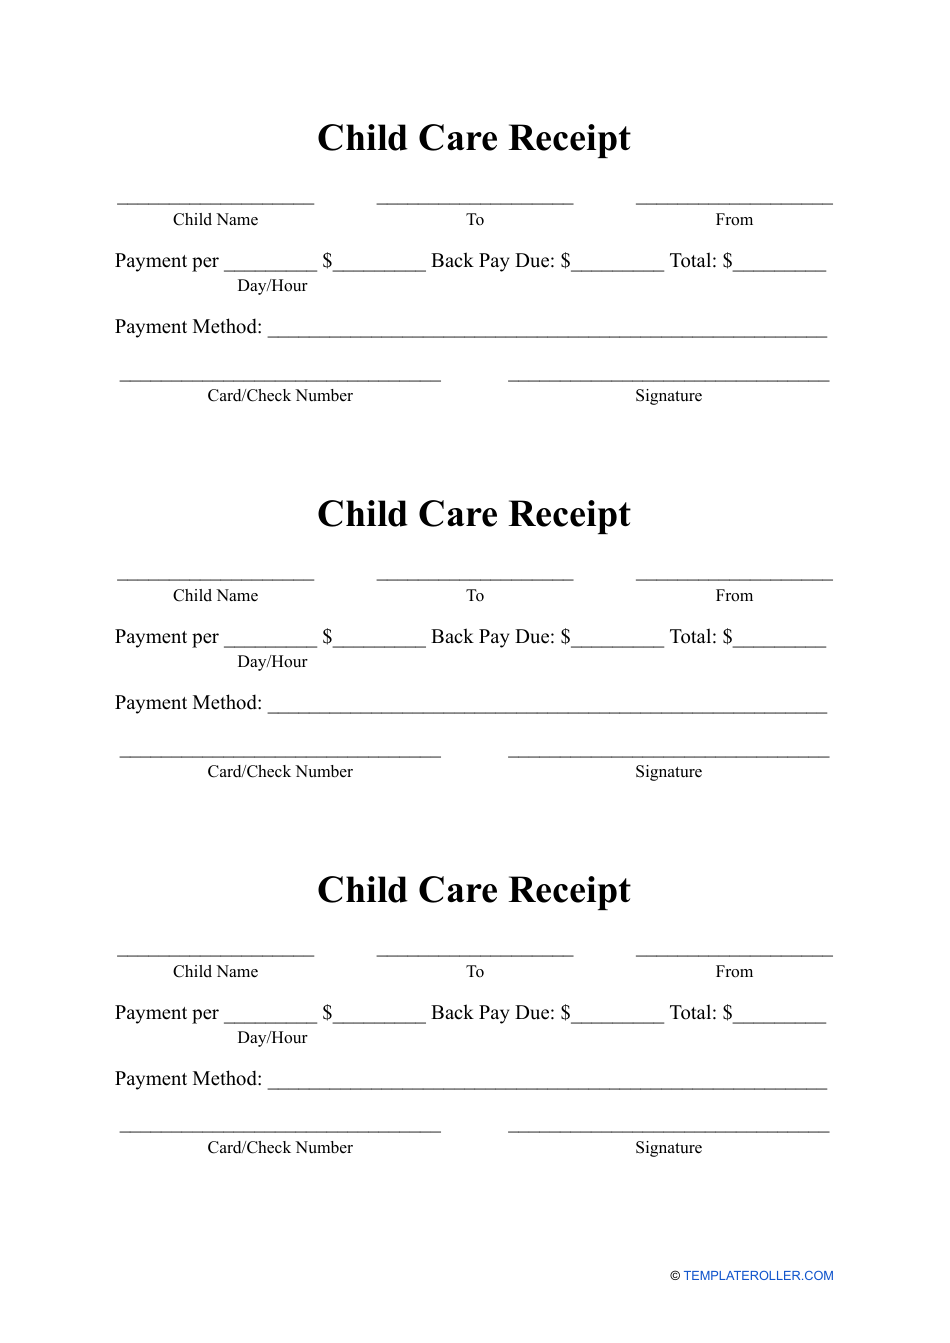 child-care-receipt-template-fill-out-sign-online-and-download-pdf